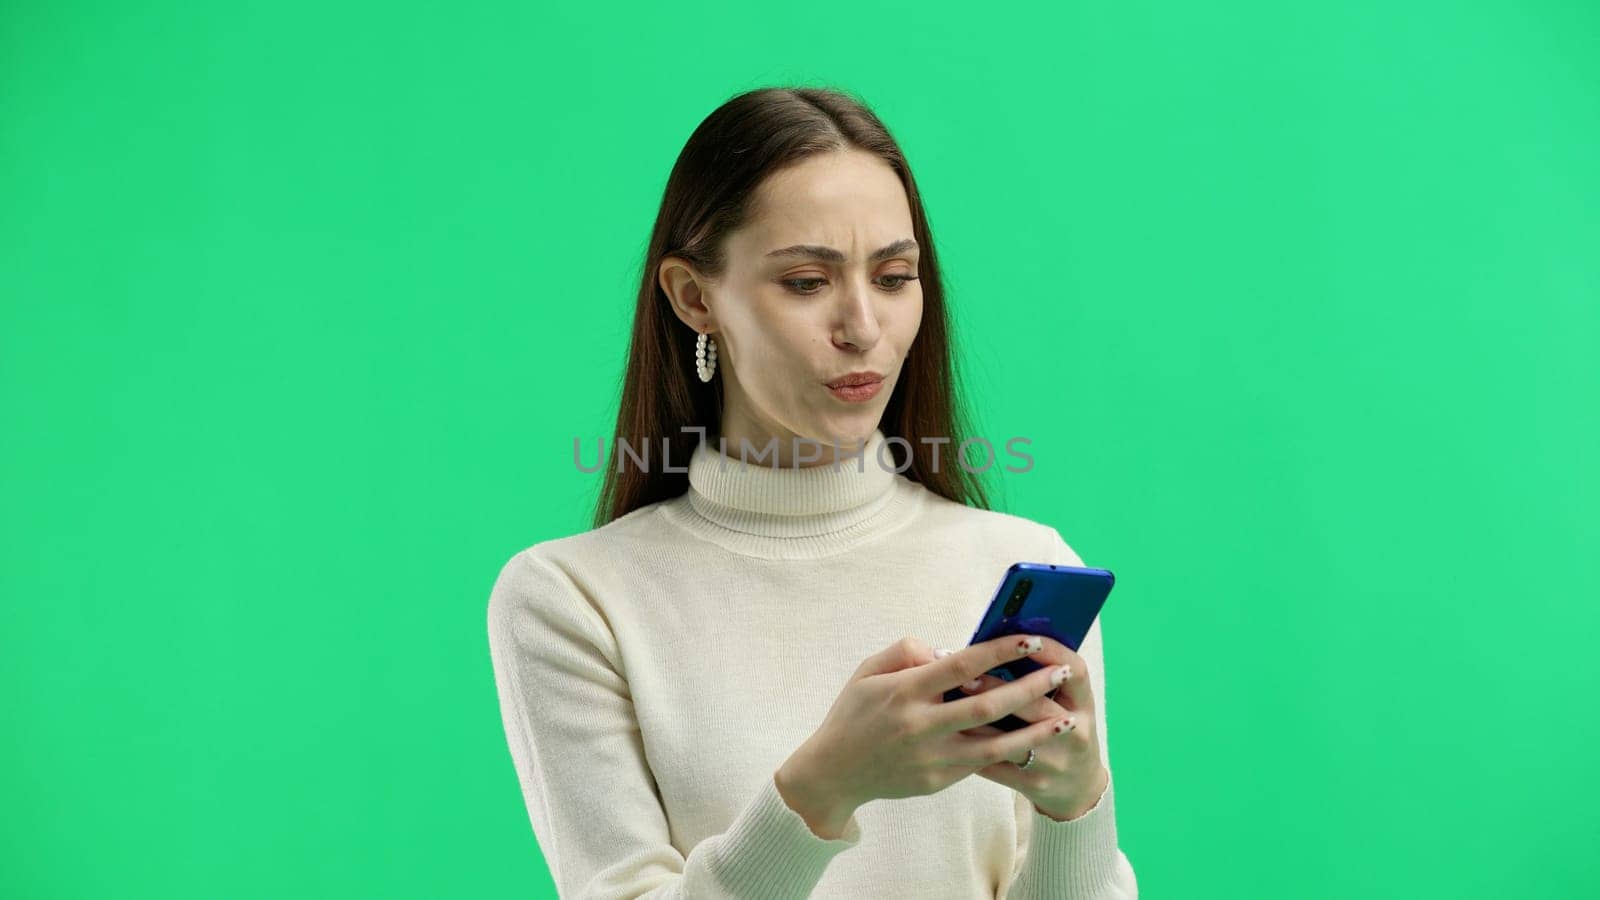 A woman, close-up, on a green background, shows a phone.